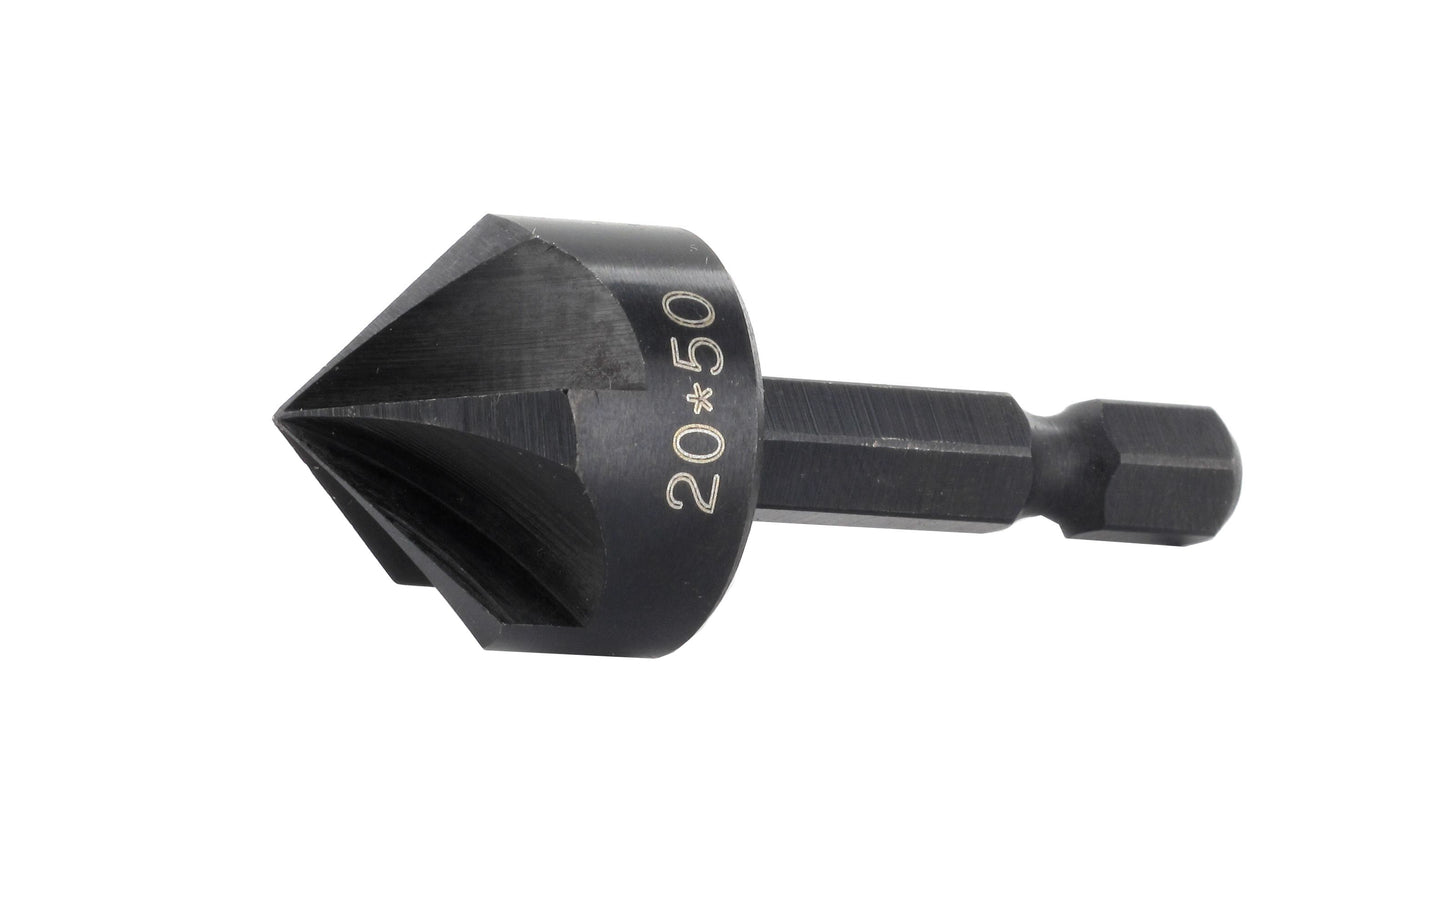 FAMAG Countersink, alloyed tool steel, with 5 edges, point angle 90°,Bit shank E6,3:Ø12, 3532012